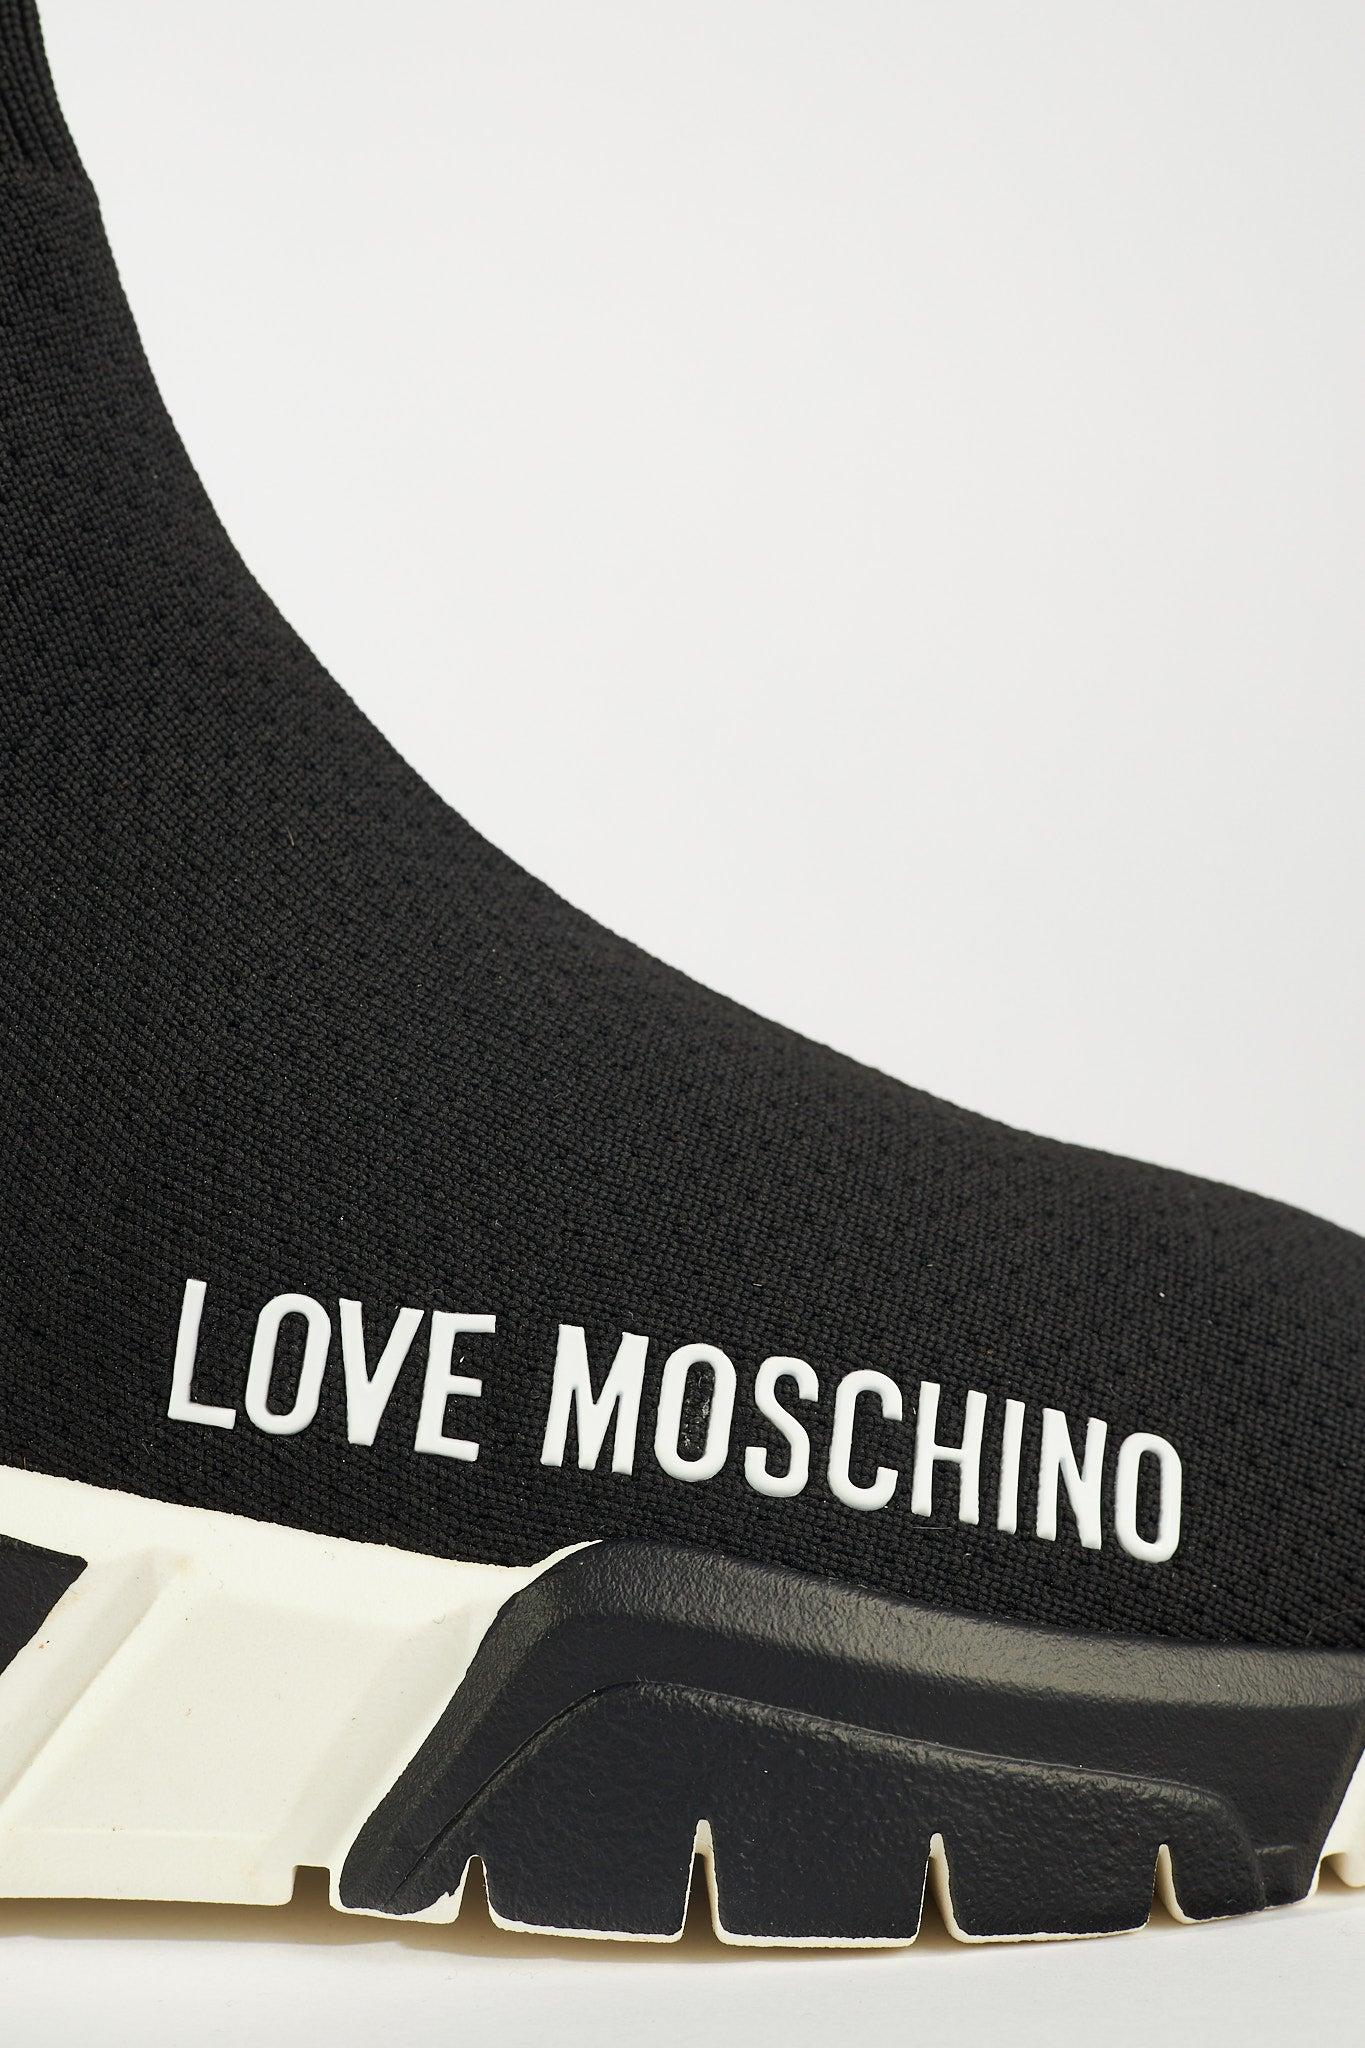 Love Moschino Sock Trainers in Black | Lyst